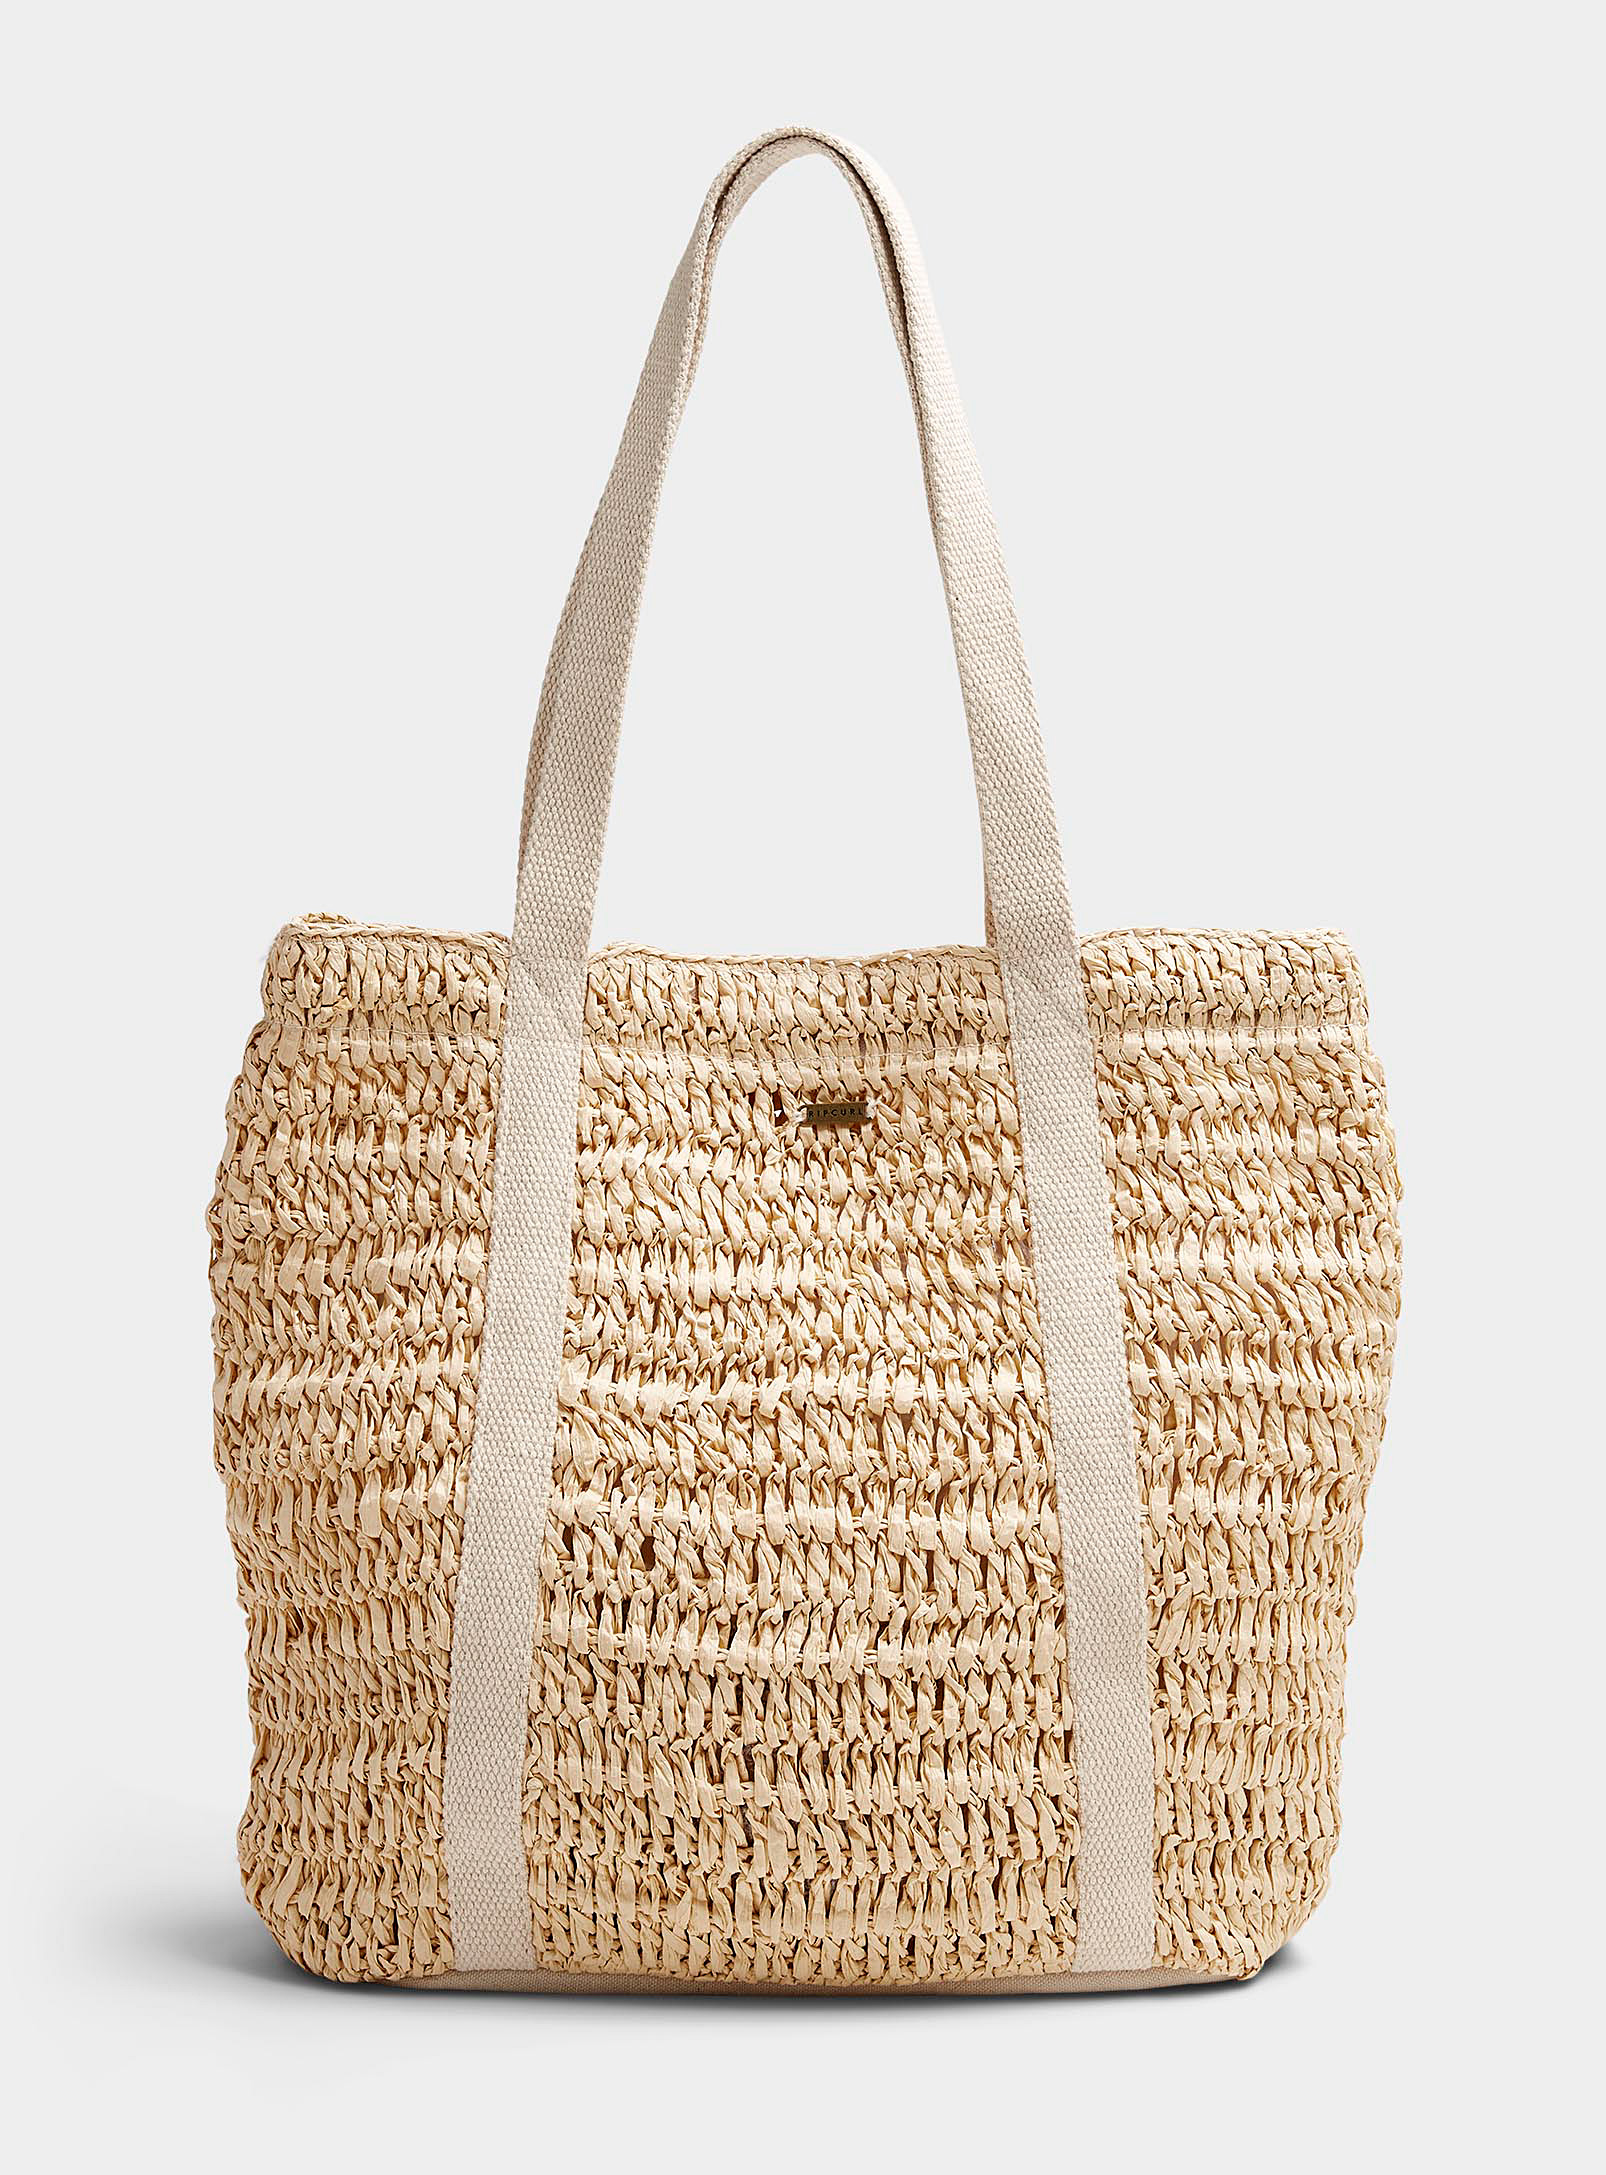 Rip Curl - Women's Woven-band braided straw Tote Bag